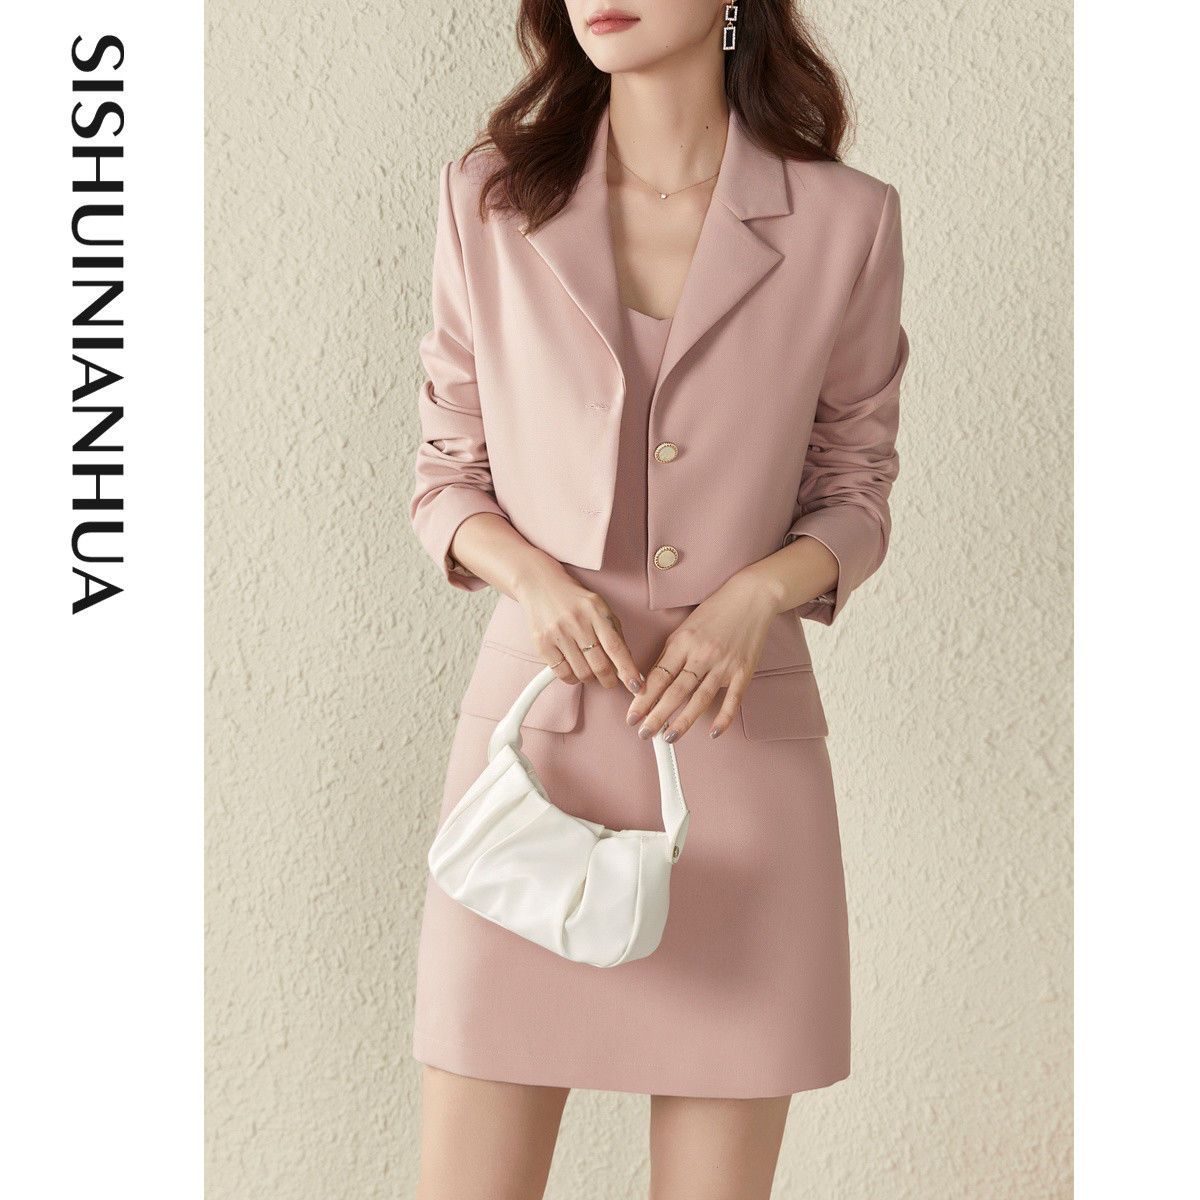 Sistime/ time flies spring new aging light mature style small suit + elegant semi skirt suit women